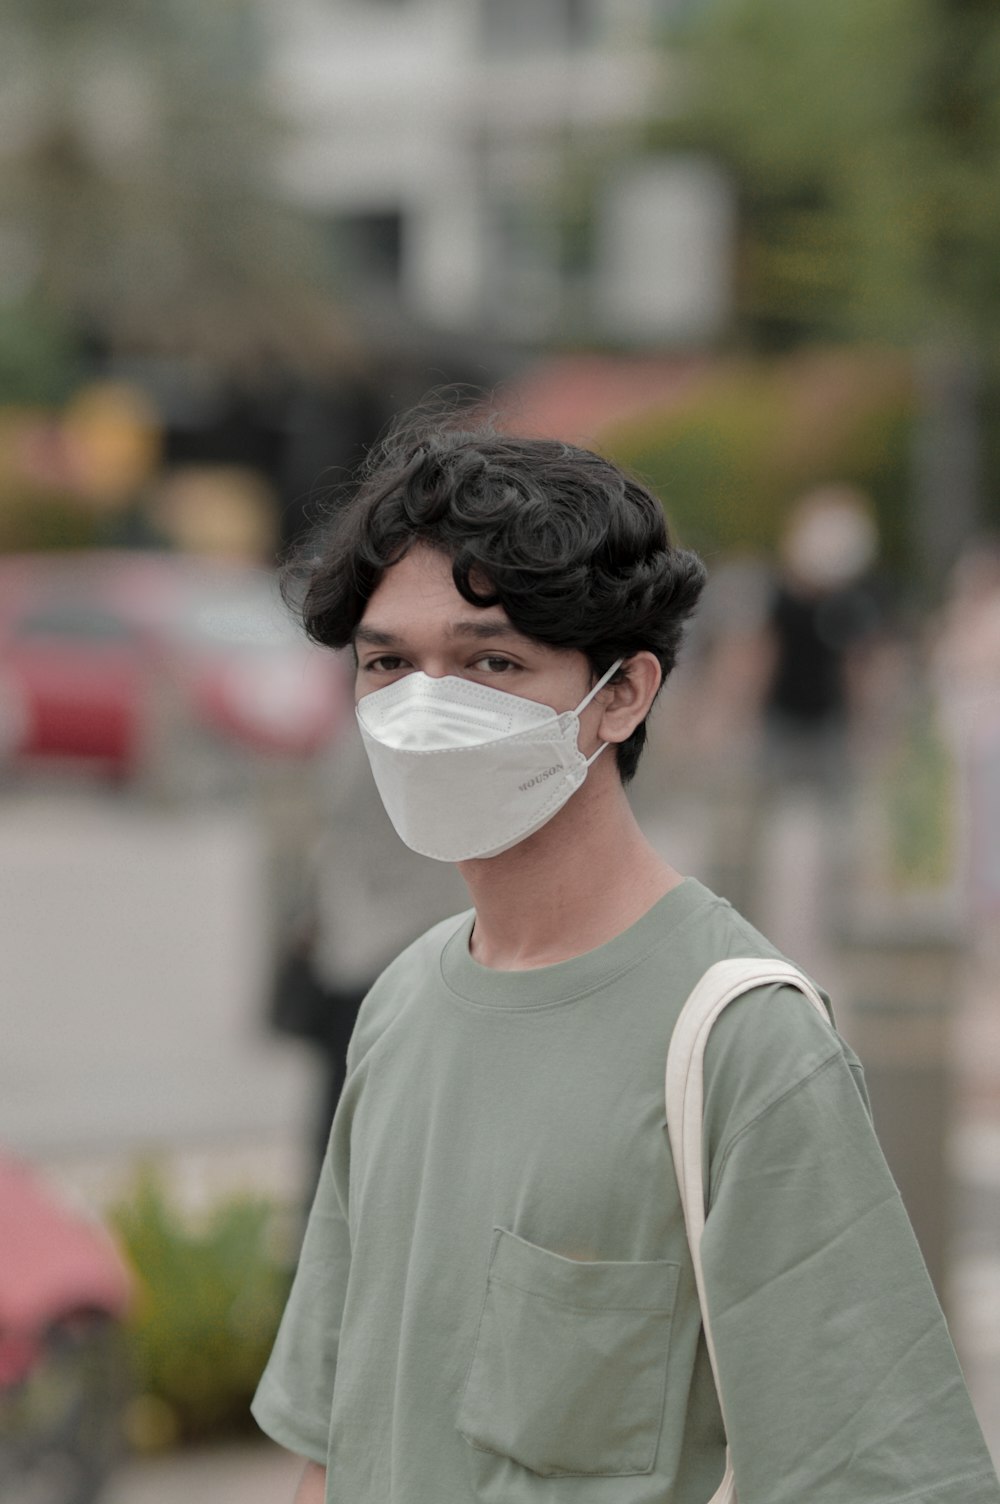 a man wearing a face mask walking down the street